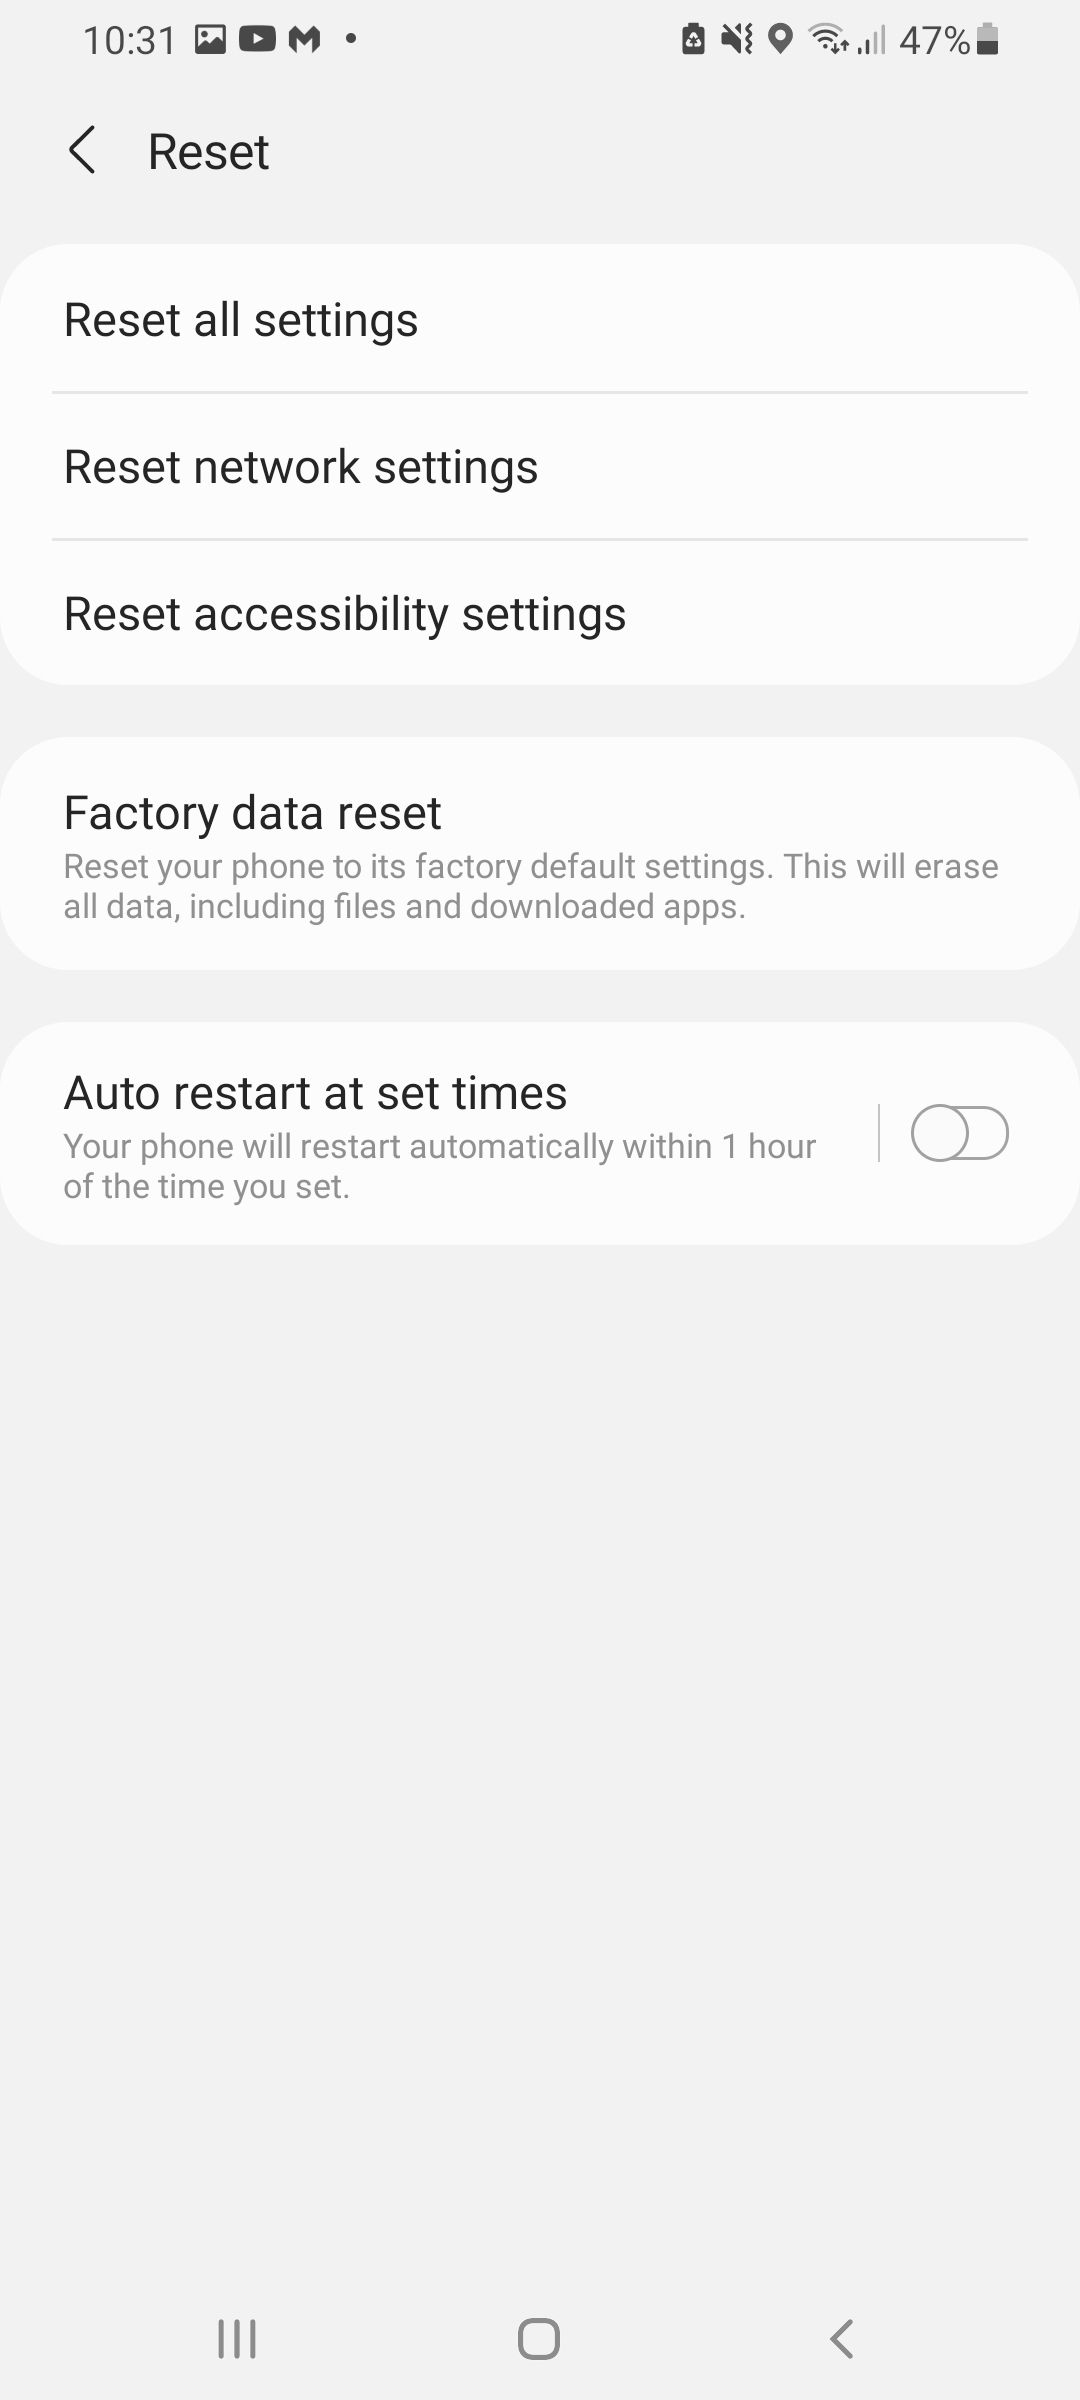 what does reset all settings mean